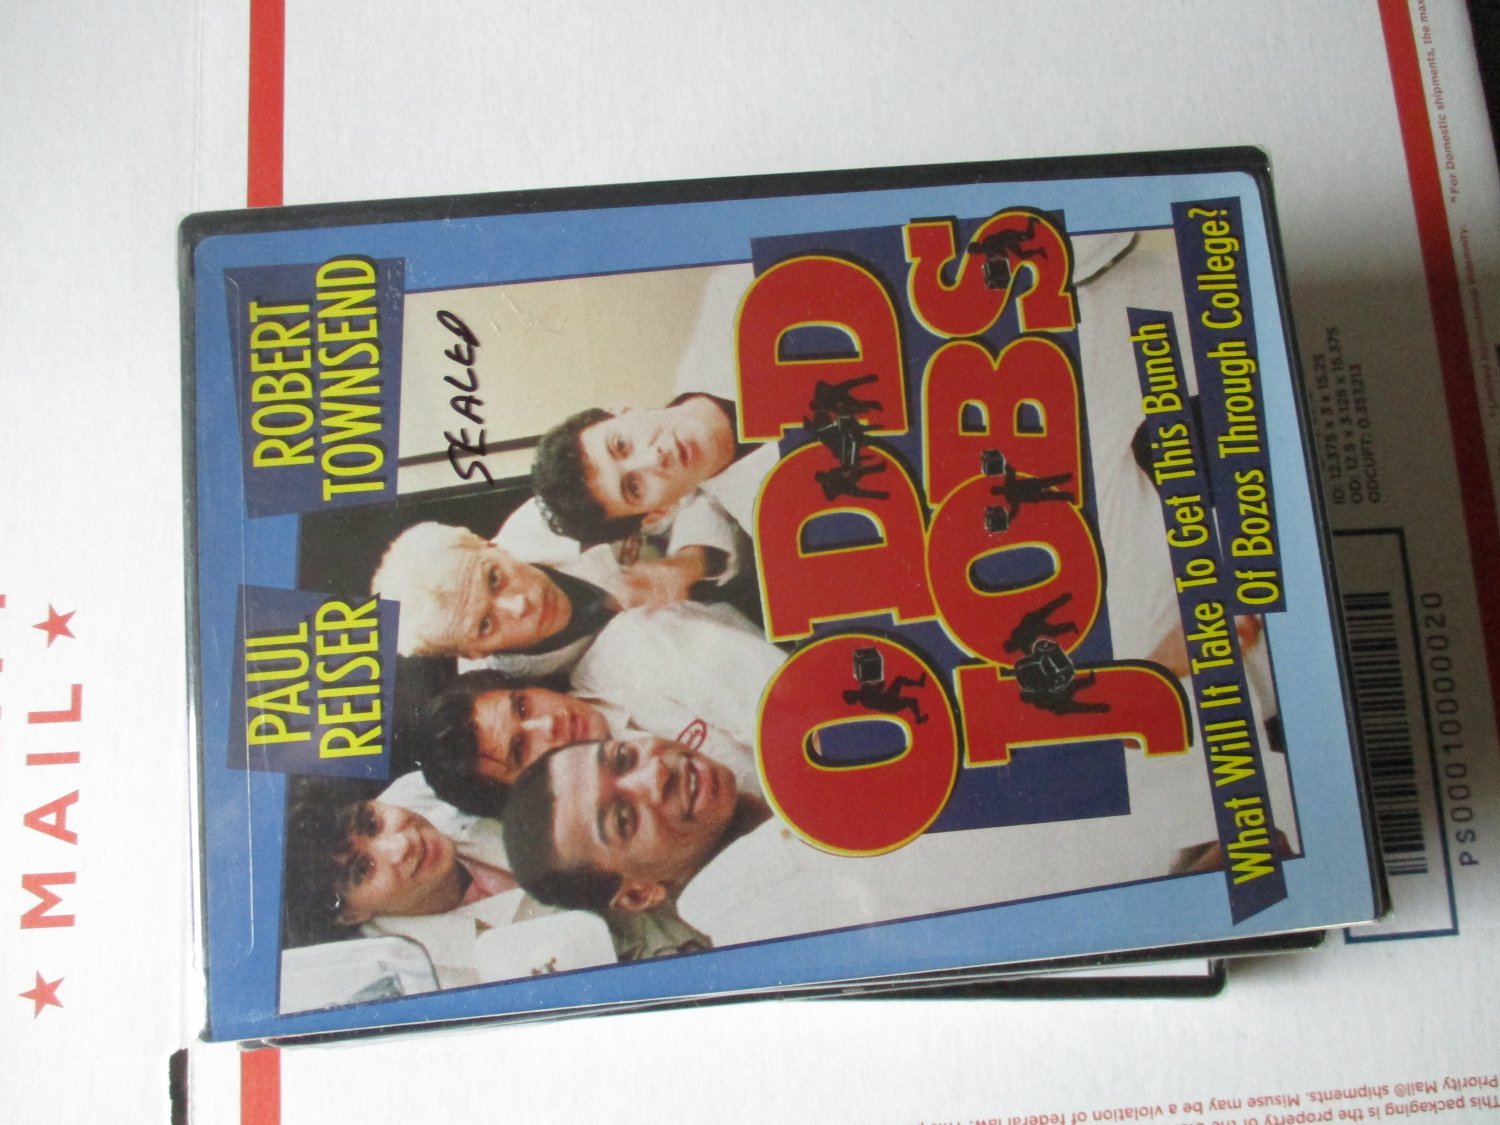 Odd Jobs What Will It Take To Get This Bunch Of Bozos Through College? dvd factory sealed